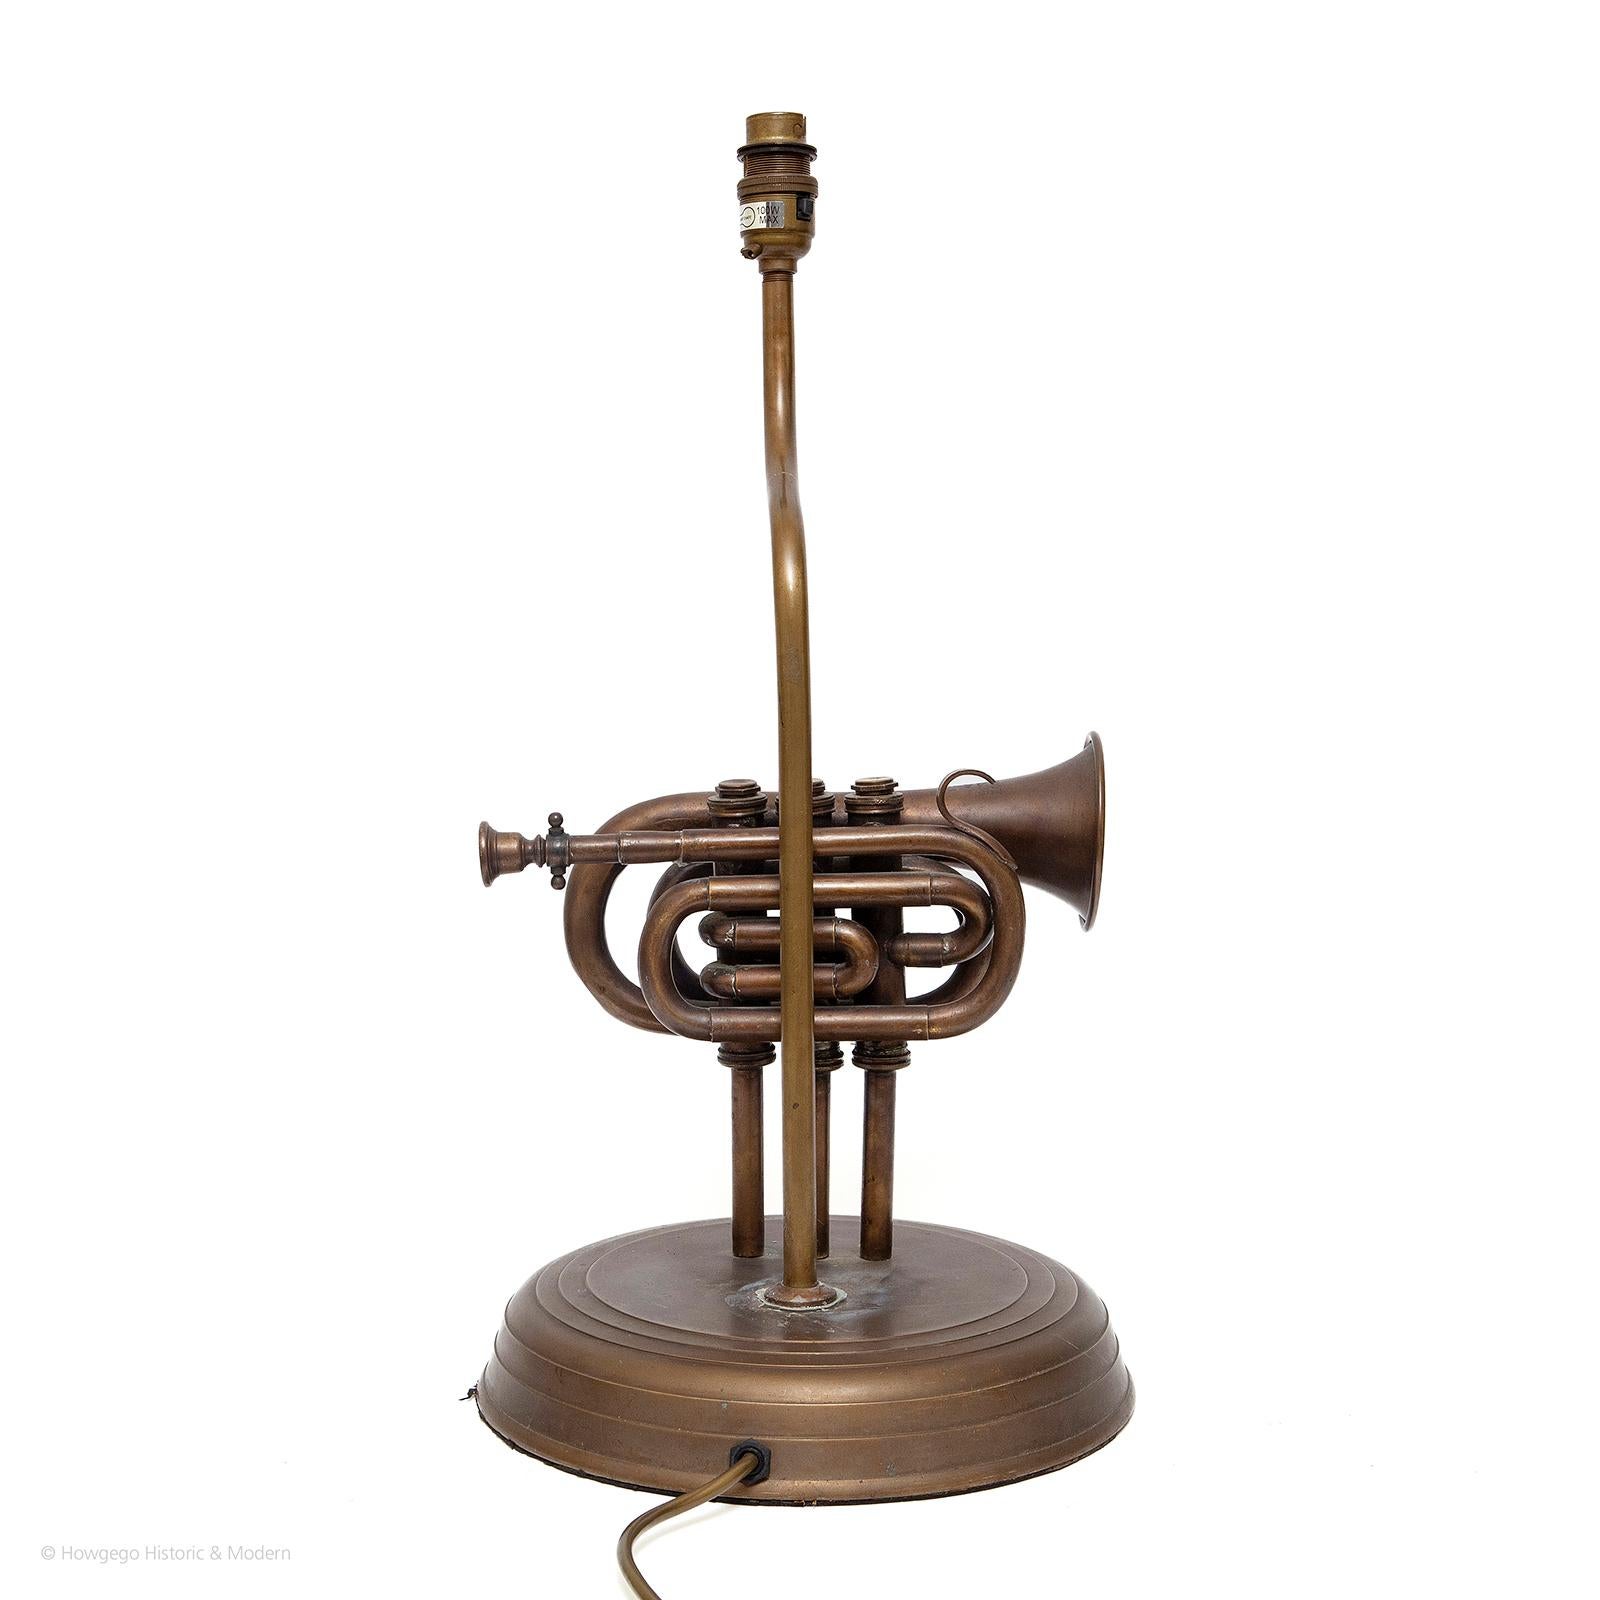 Vintage, brass, pocket trumpet, table lamp, 19½” high
A fun piece of signature and conversation mood lighting
Bore brass instrument pitched in Bb, used in brass bands, concert bands and occasionally orchestras. 
Inspired by the Besson pocket